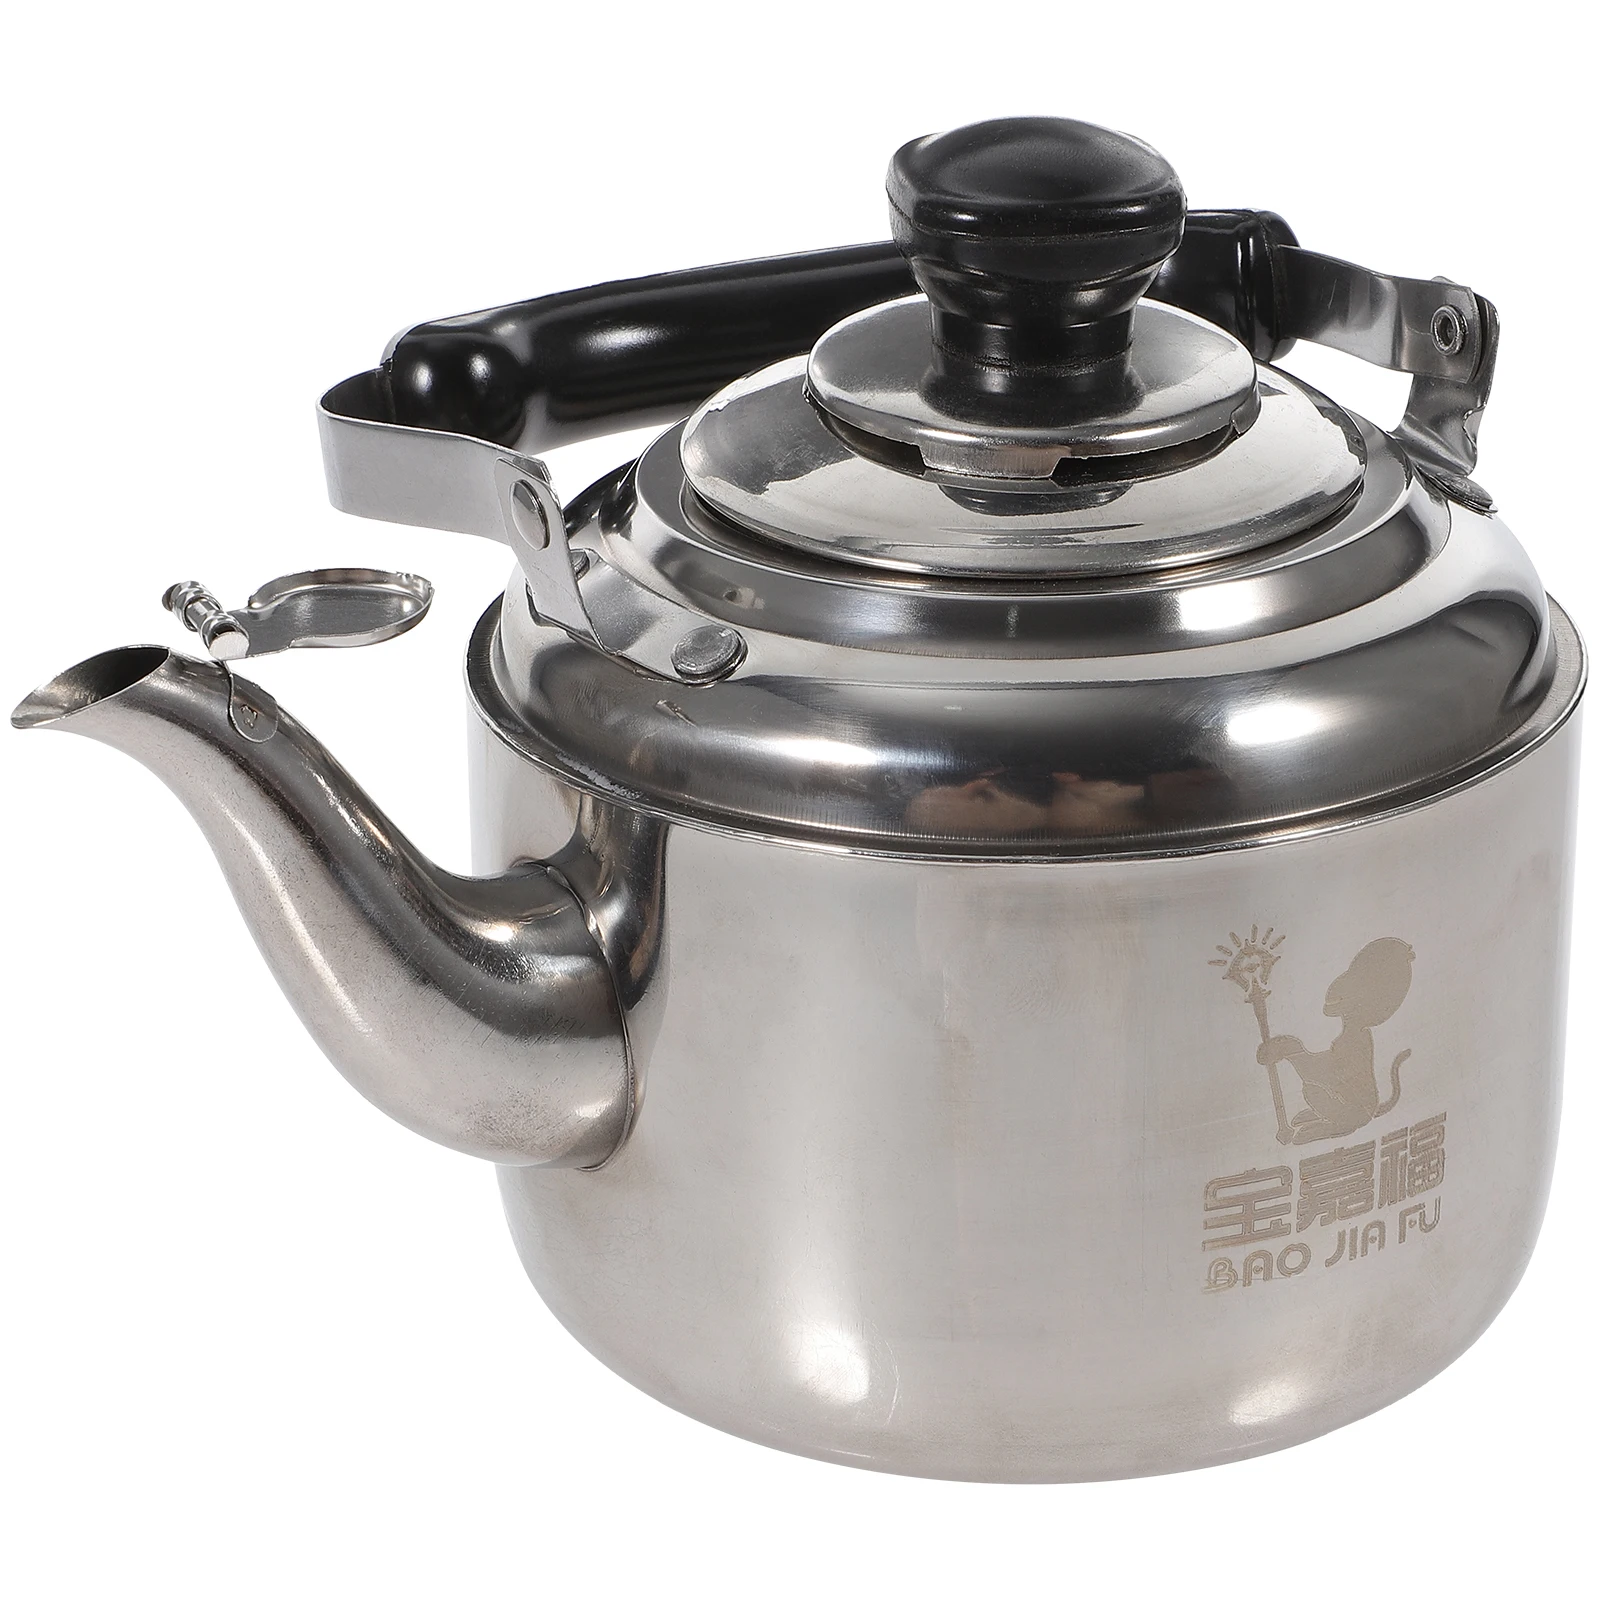 

Boiler Gas Stove Kettle Hot Water Stovetop Teapot Steel Stainless Kettles Boiling Pot Pots Tea Coffee Camping Sound Whistling